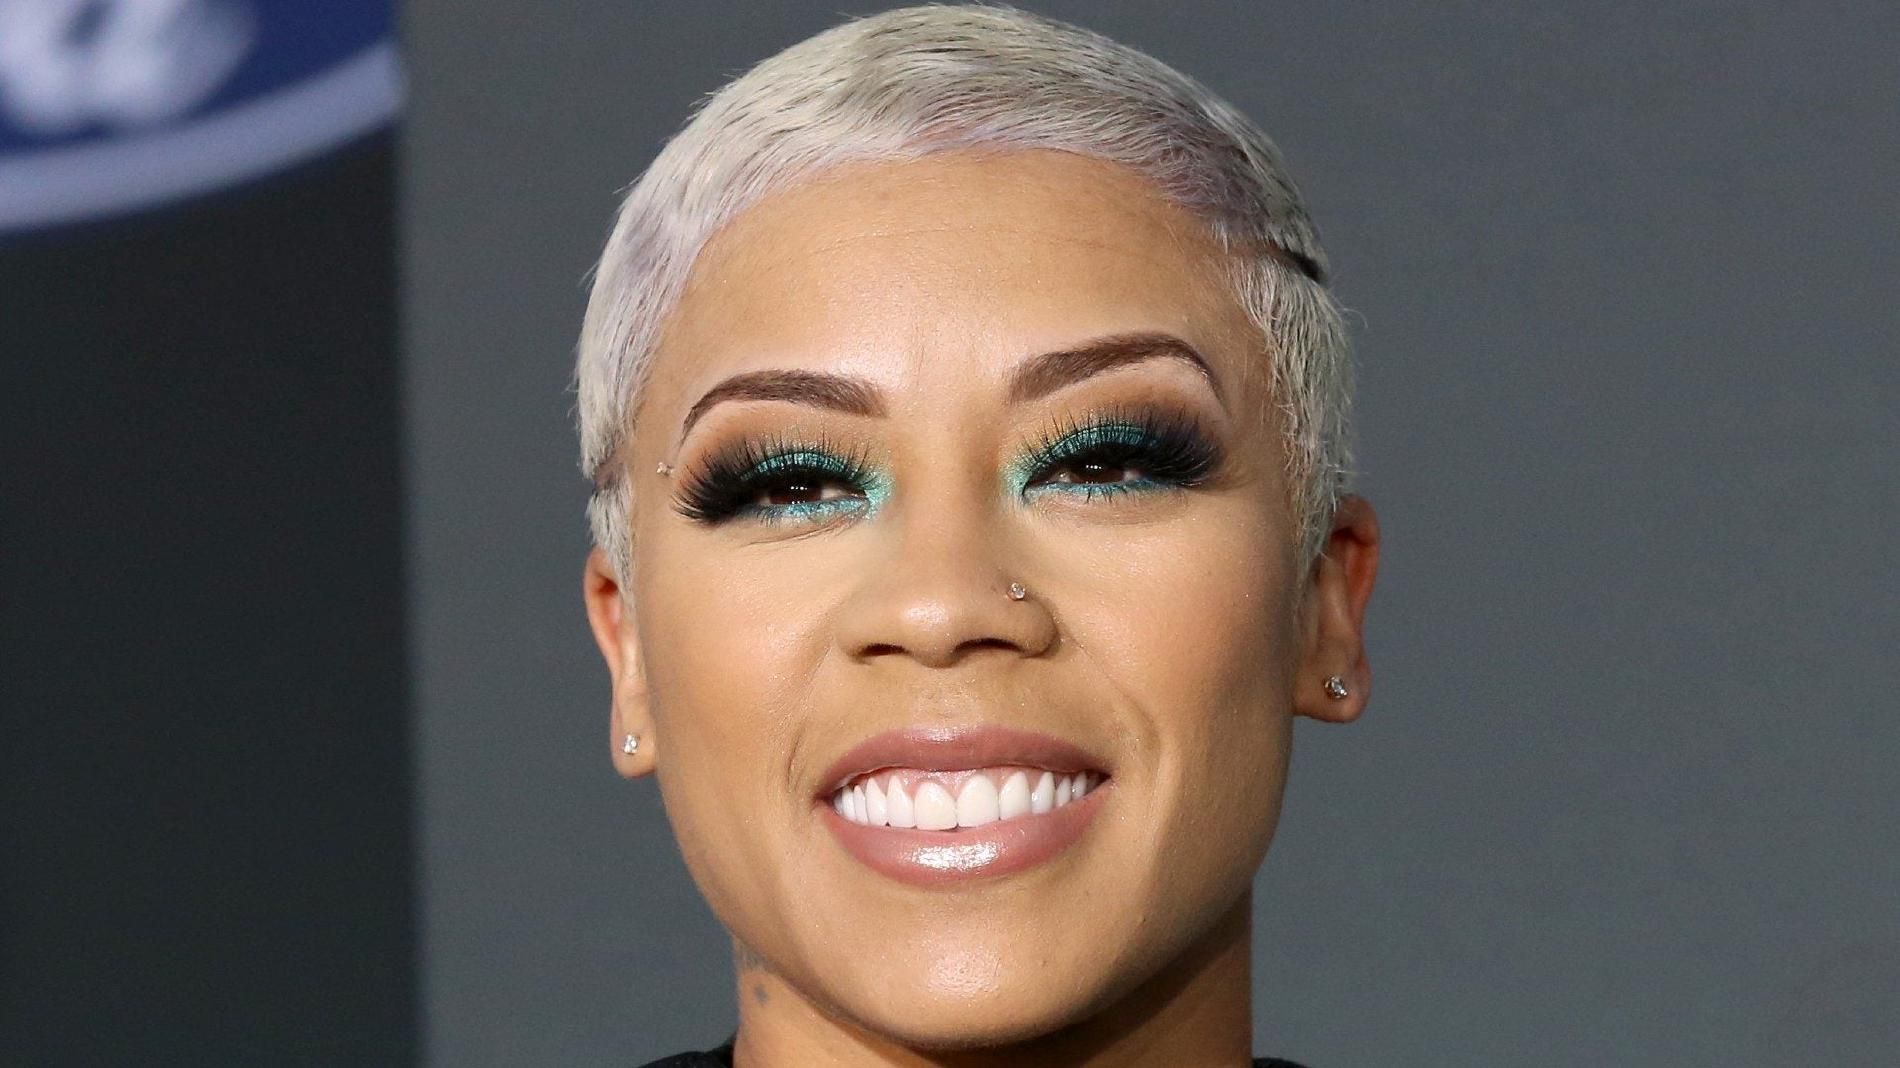 Keyshia Cole Had To Learn Not To Lay Hands on Folks, After It Cost Her A Friendship [VIDEO]